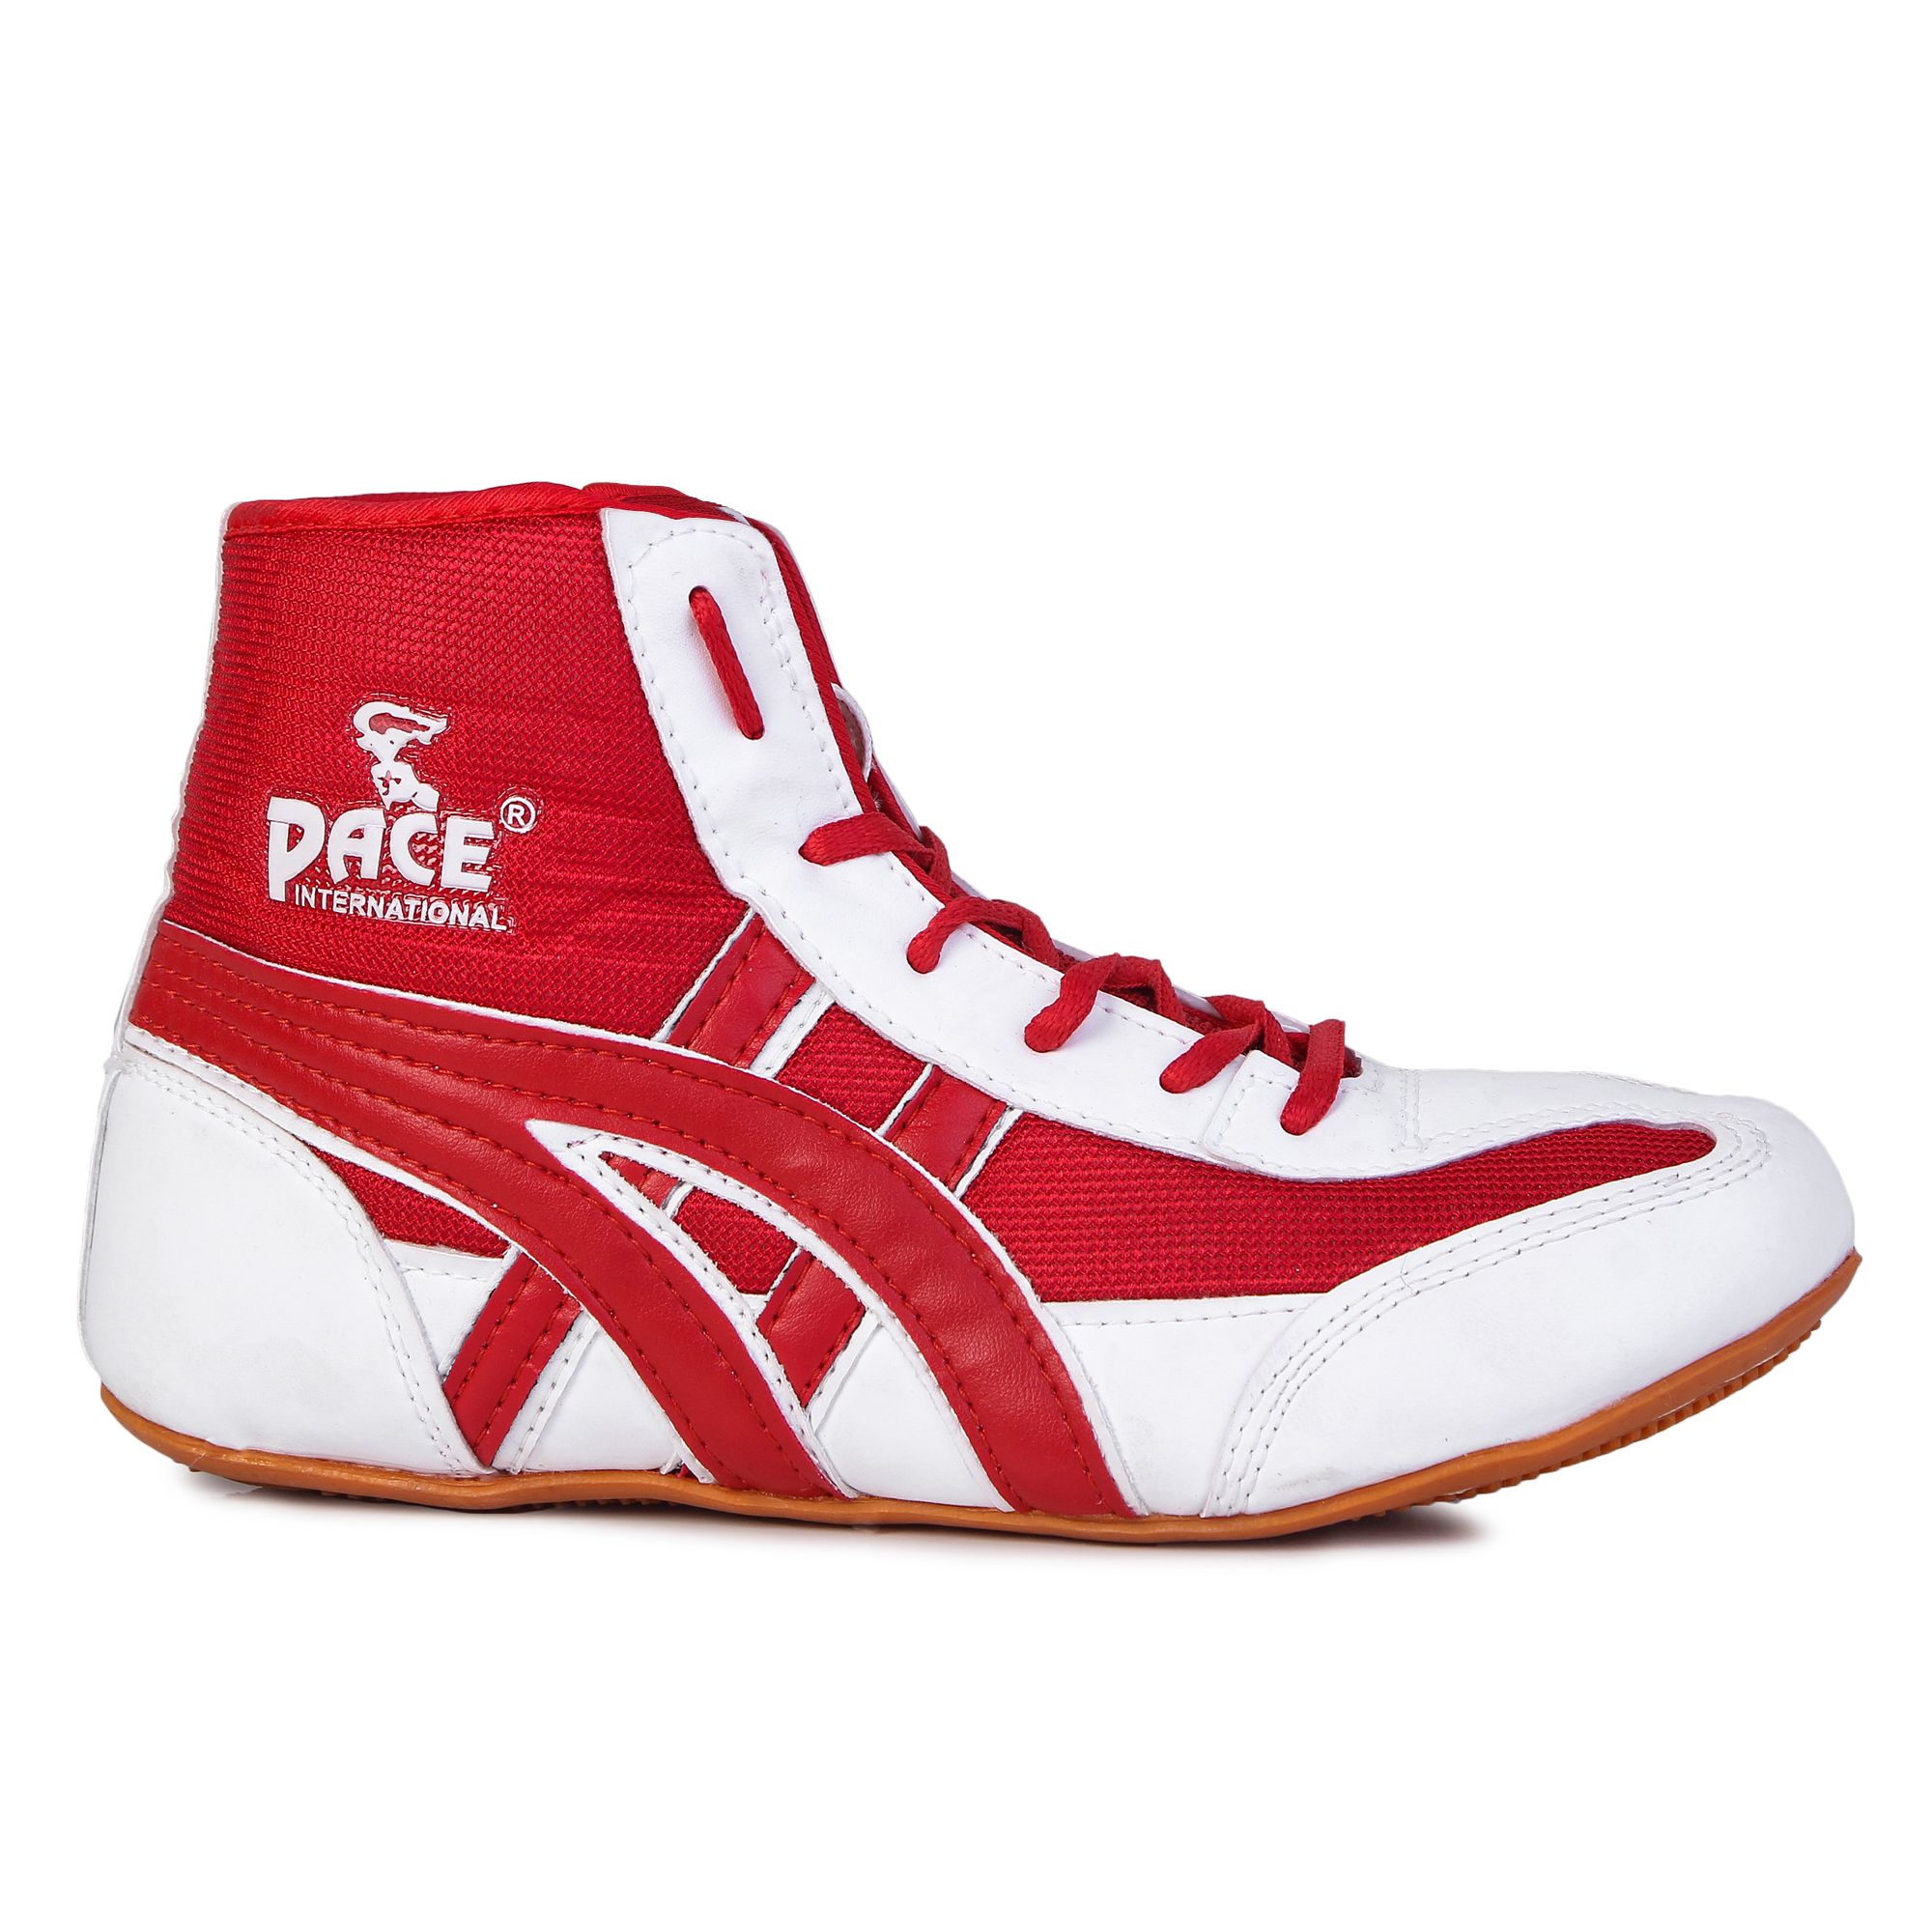 Pace International Kabaddi Shoes Red Indoor Court Shoes - Buy Pace ...